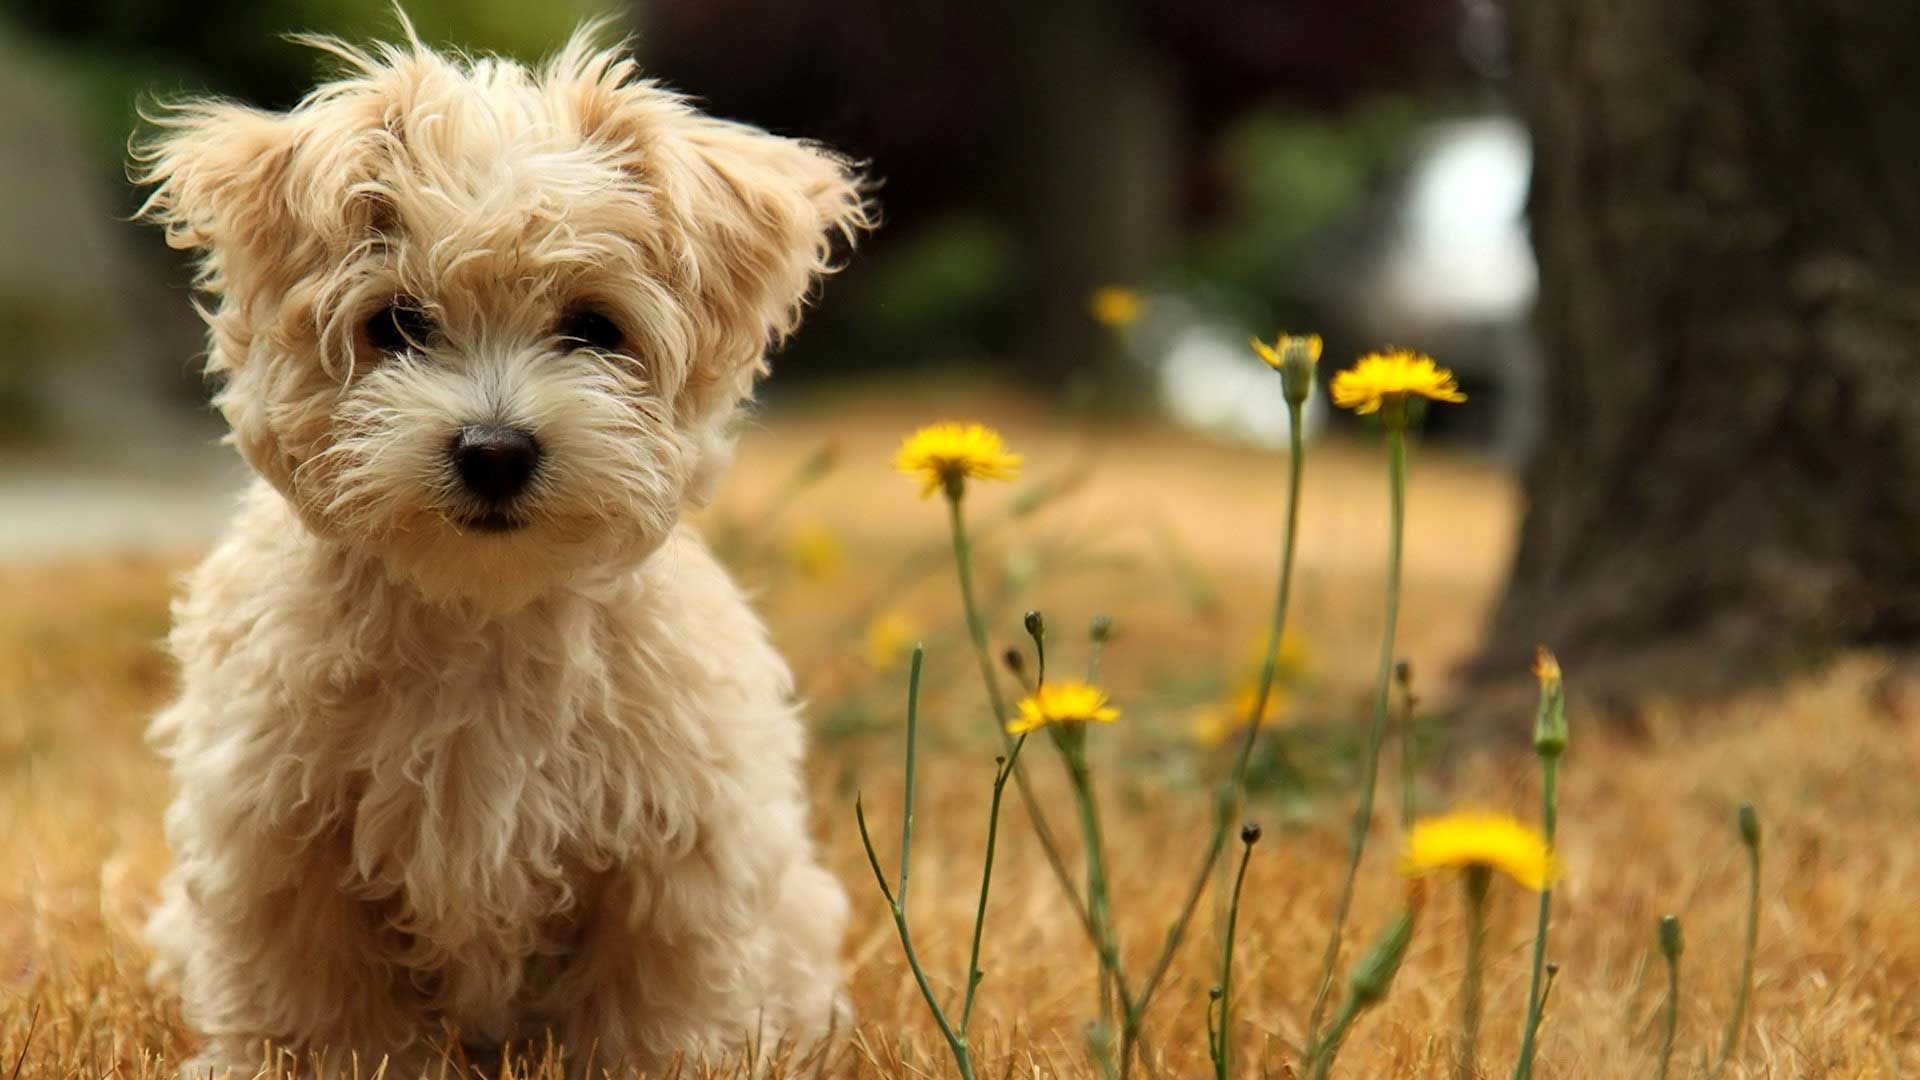 Cute Dog Wallpapers HD Free download 